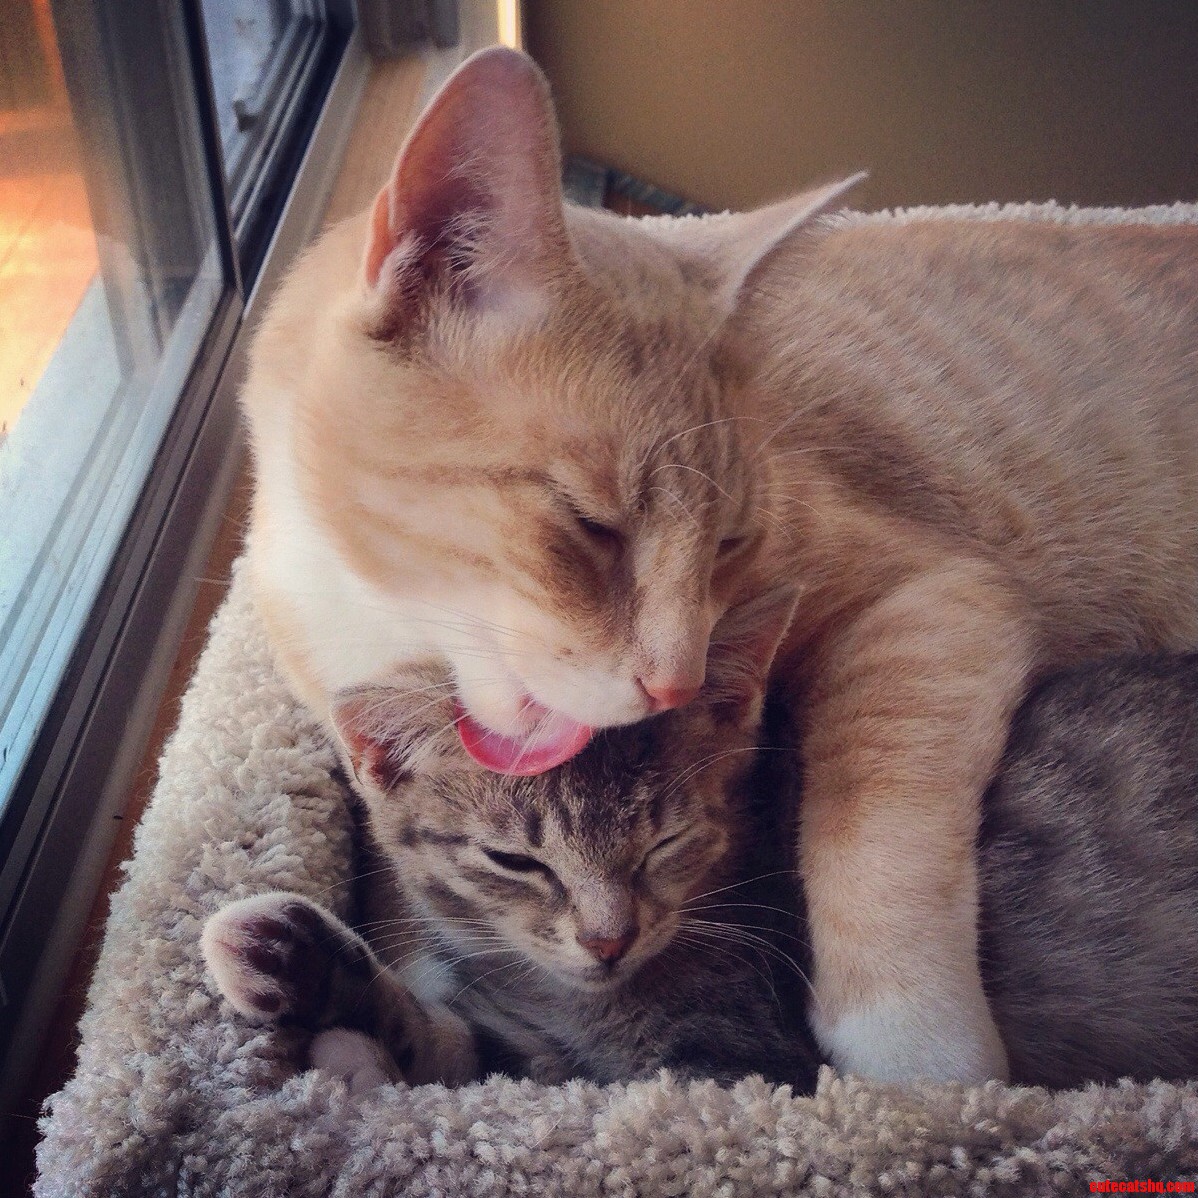 My Parents Rescued A Kitten. These Two Are Best Friends Now.